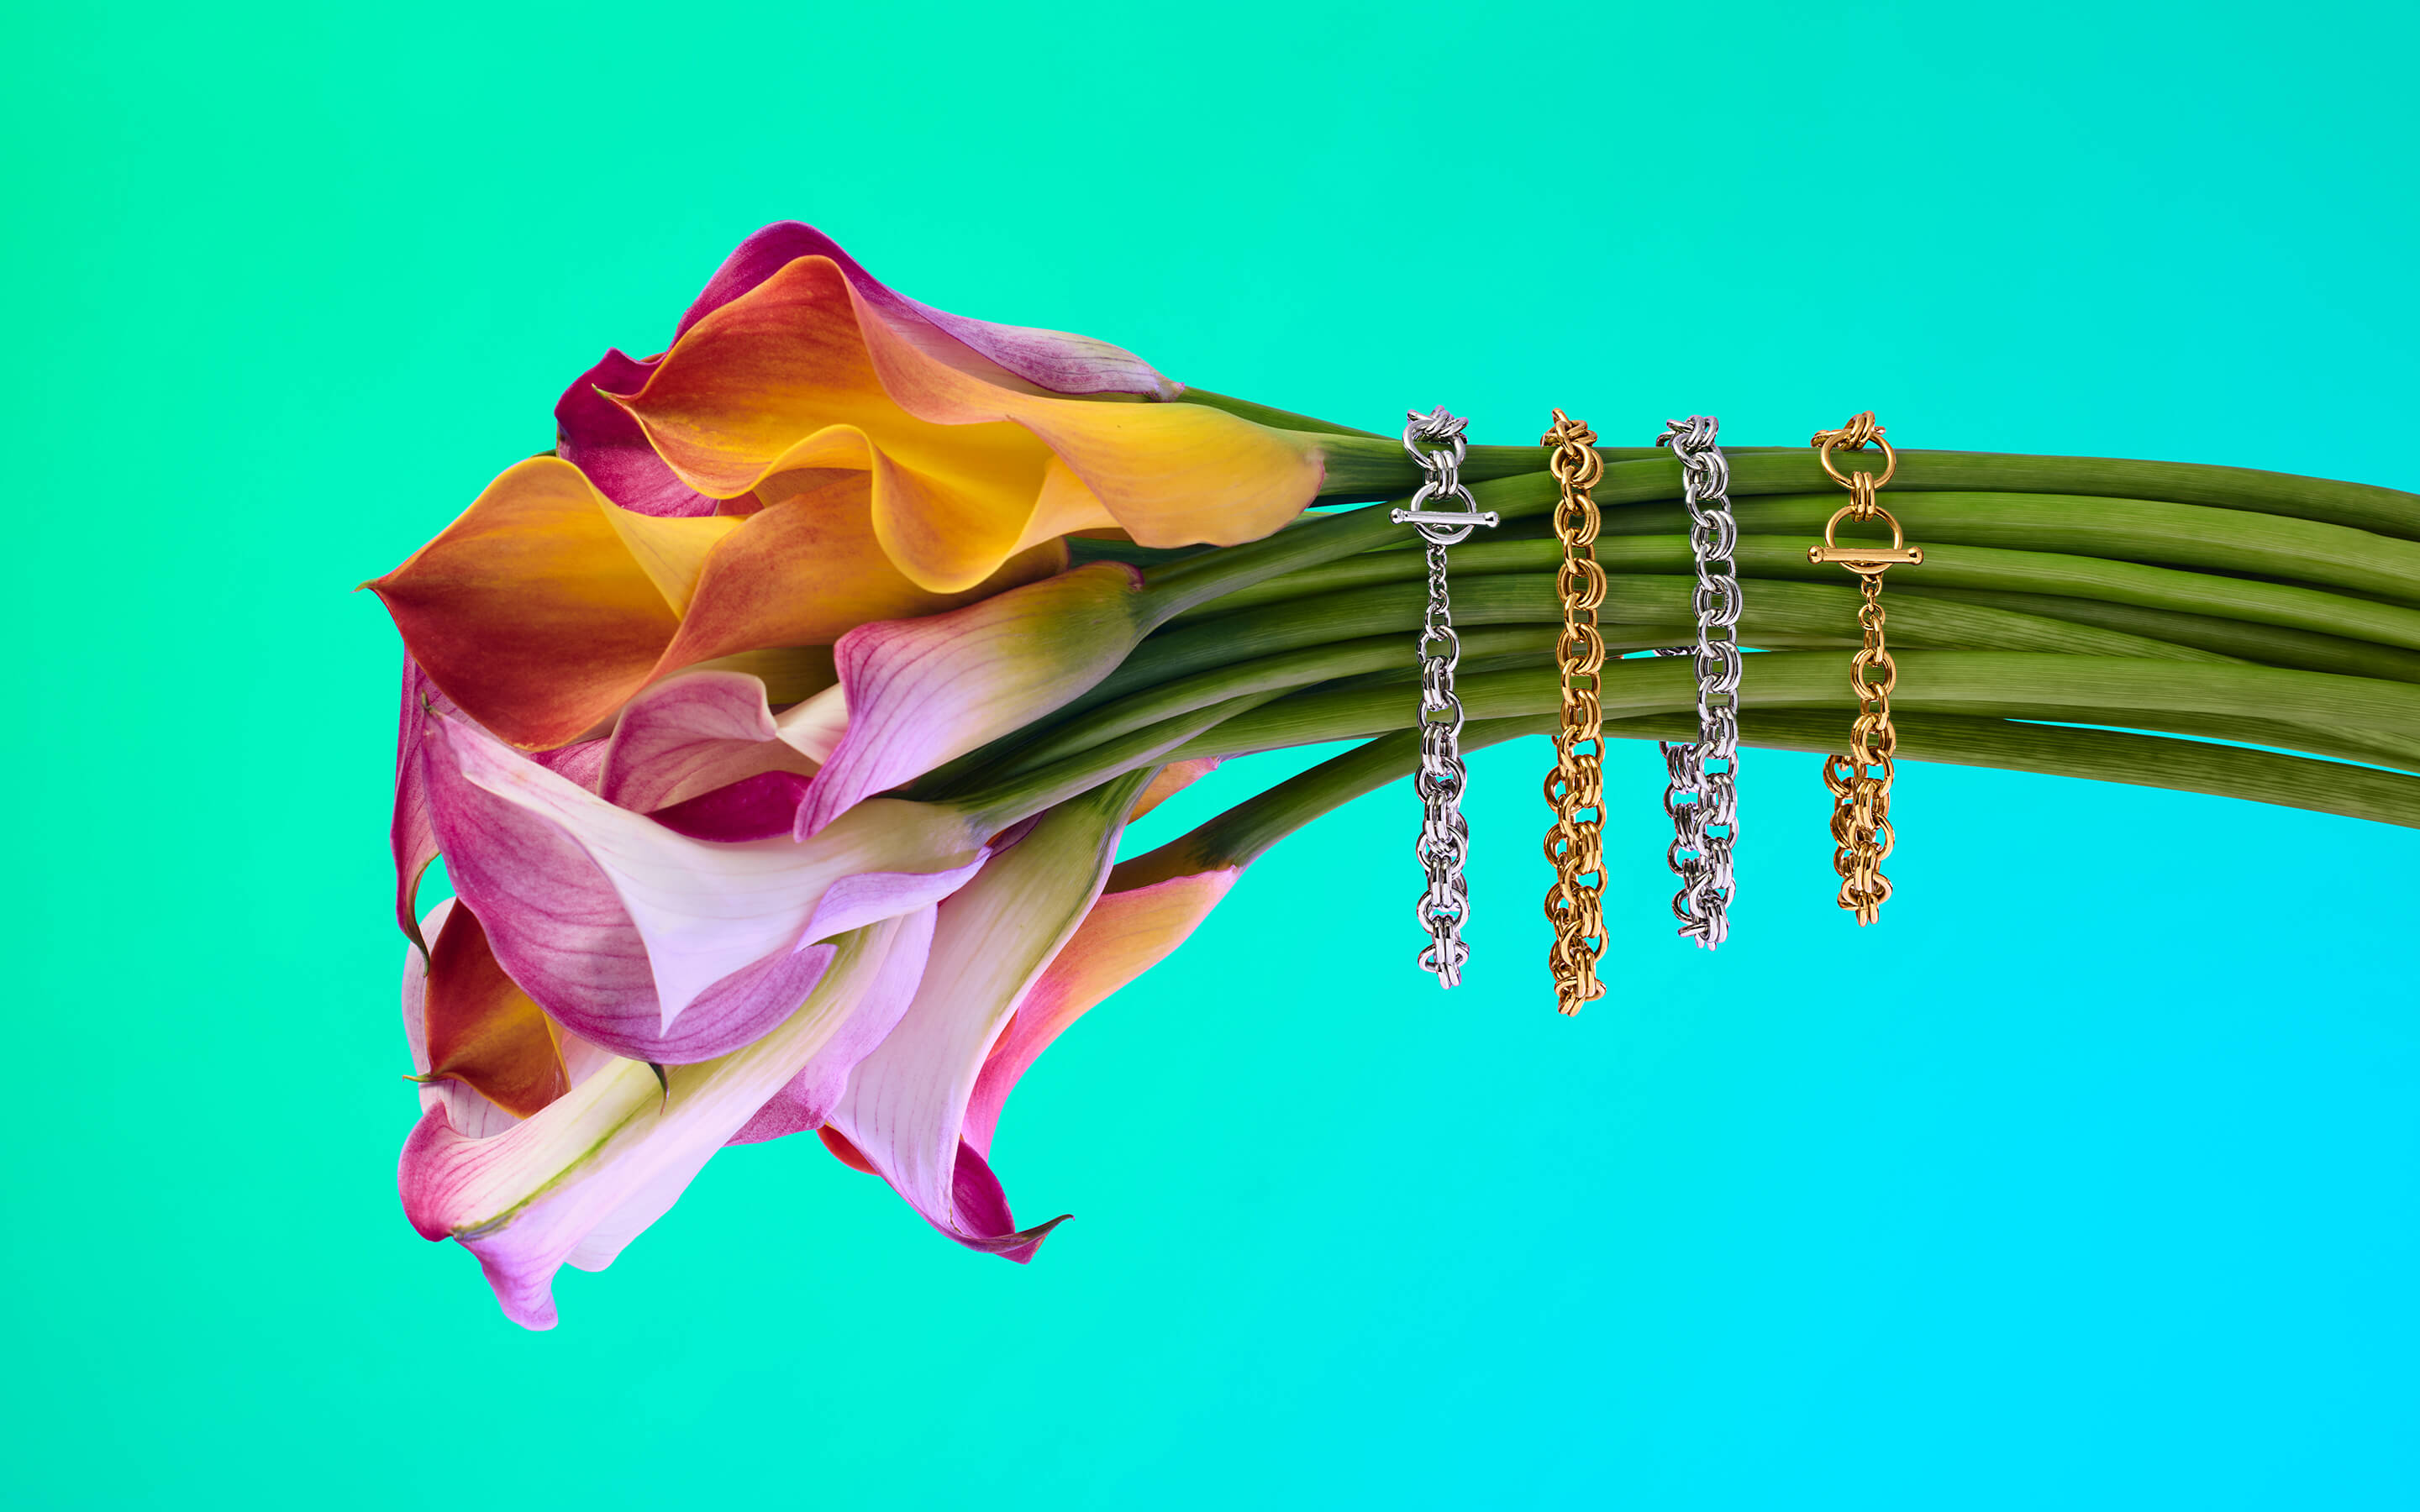 Sterling silver and gold bracelets on a colorful flower